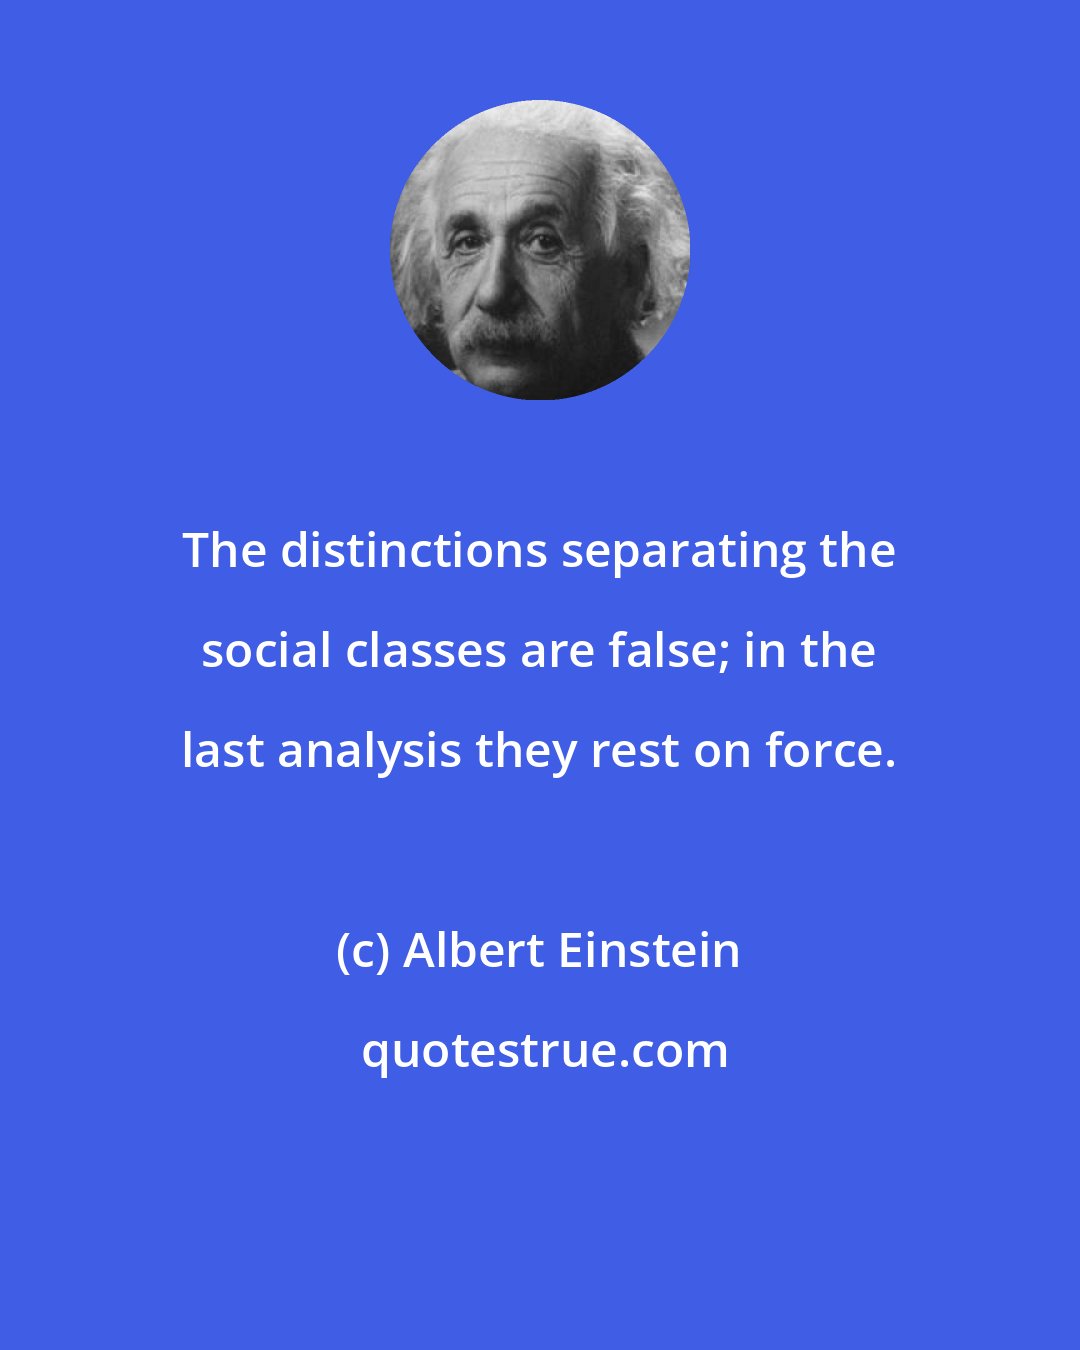 Albert Einstein: The distinctions separating the social classes are false; in the last analysis they rest on force.